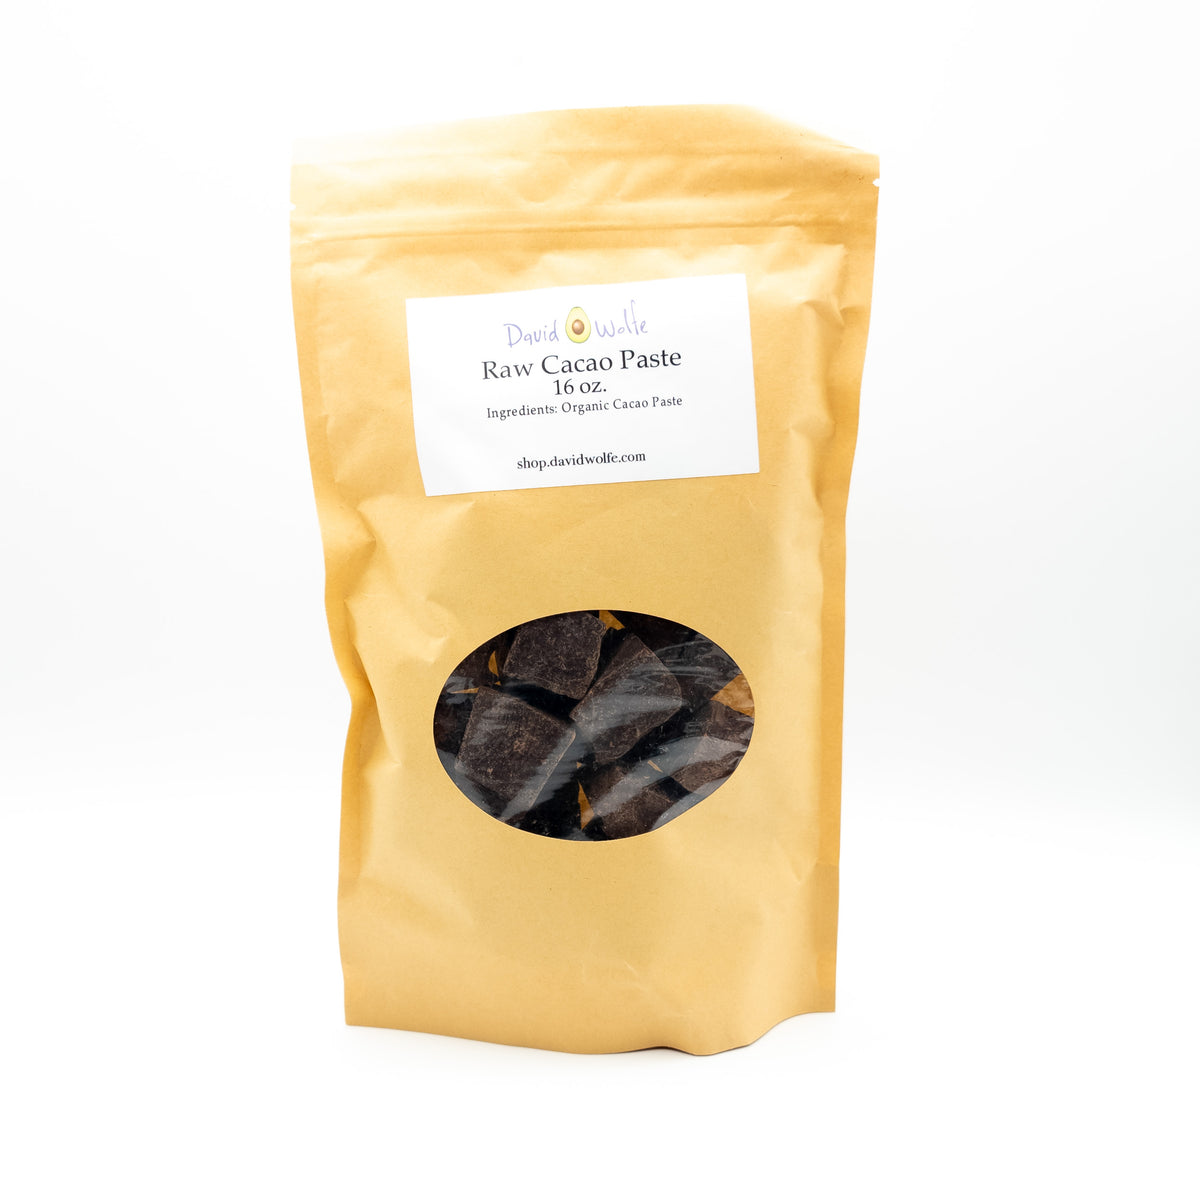 Certified 100% Organic Upper Amazonian Raw Cacao Paste